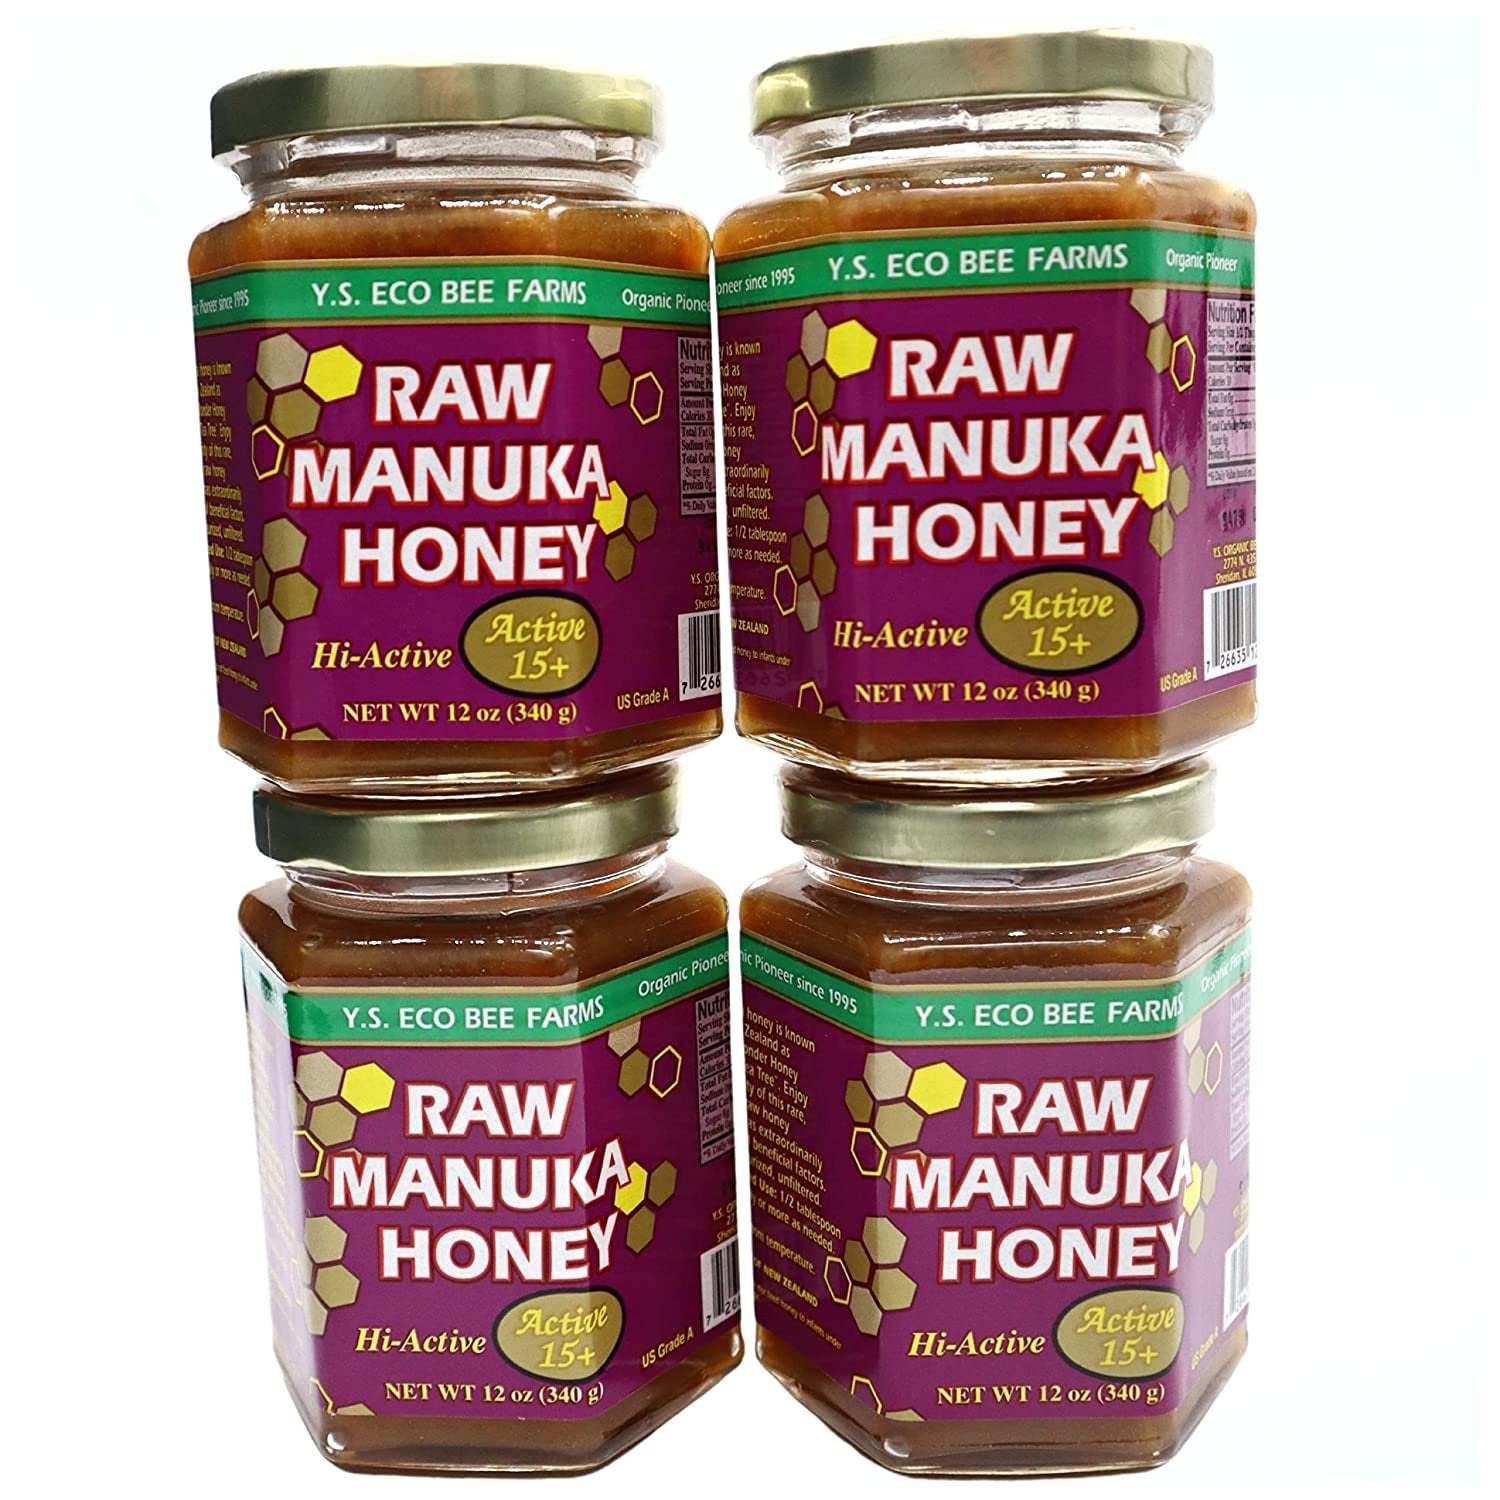 Y.S. Eco Bee Farms, 100% Certified Raw Manuka Honey, Hi-Active, Active 15plus, Unpasteurized, Unfiltered, Rare, Exotic, Raw, Kosher, Gluten Free, "The Wonder Honey Of The Tea Tree", 12 Oz - 4 Jars